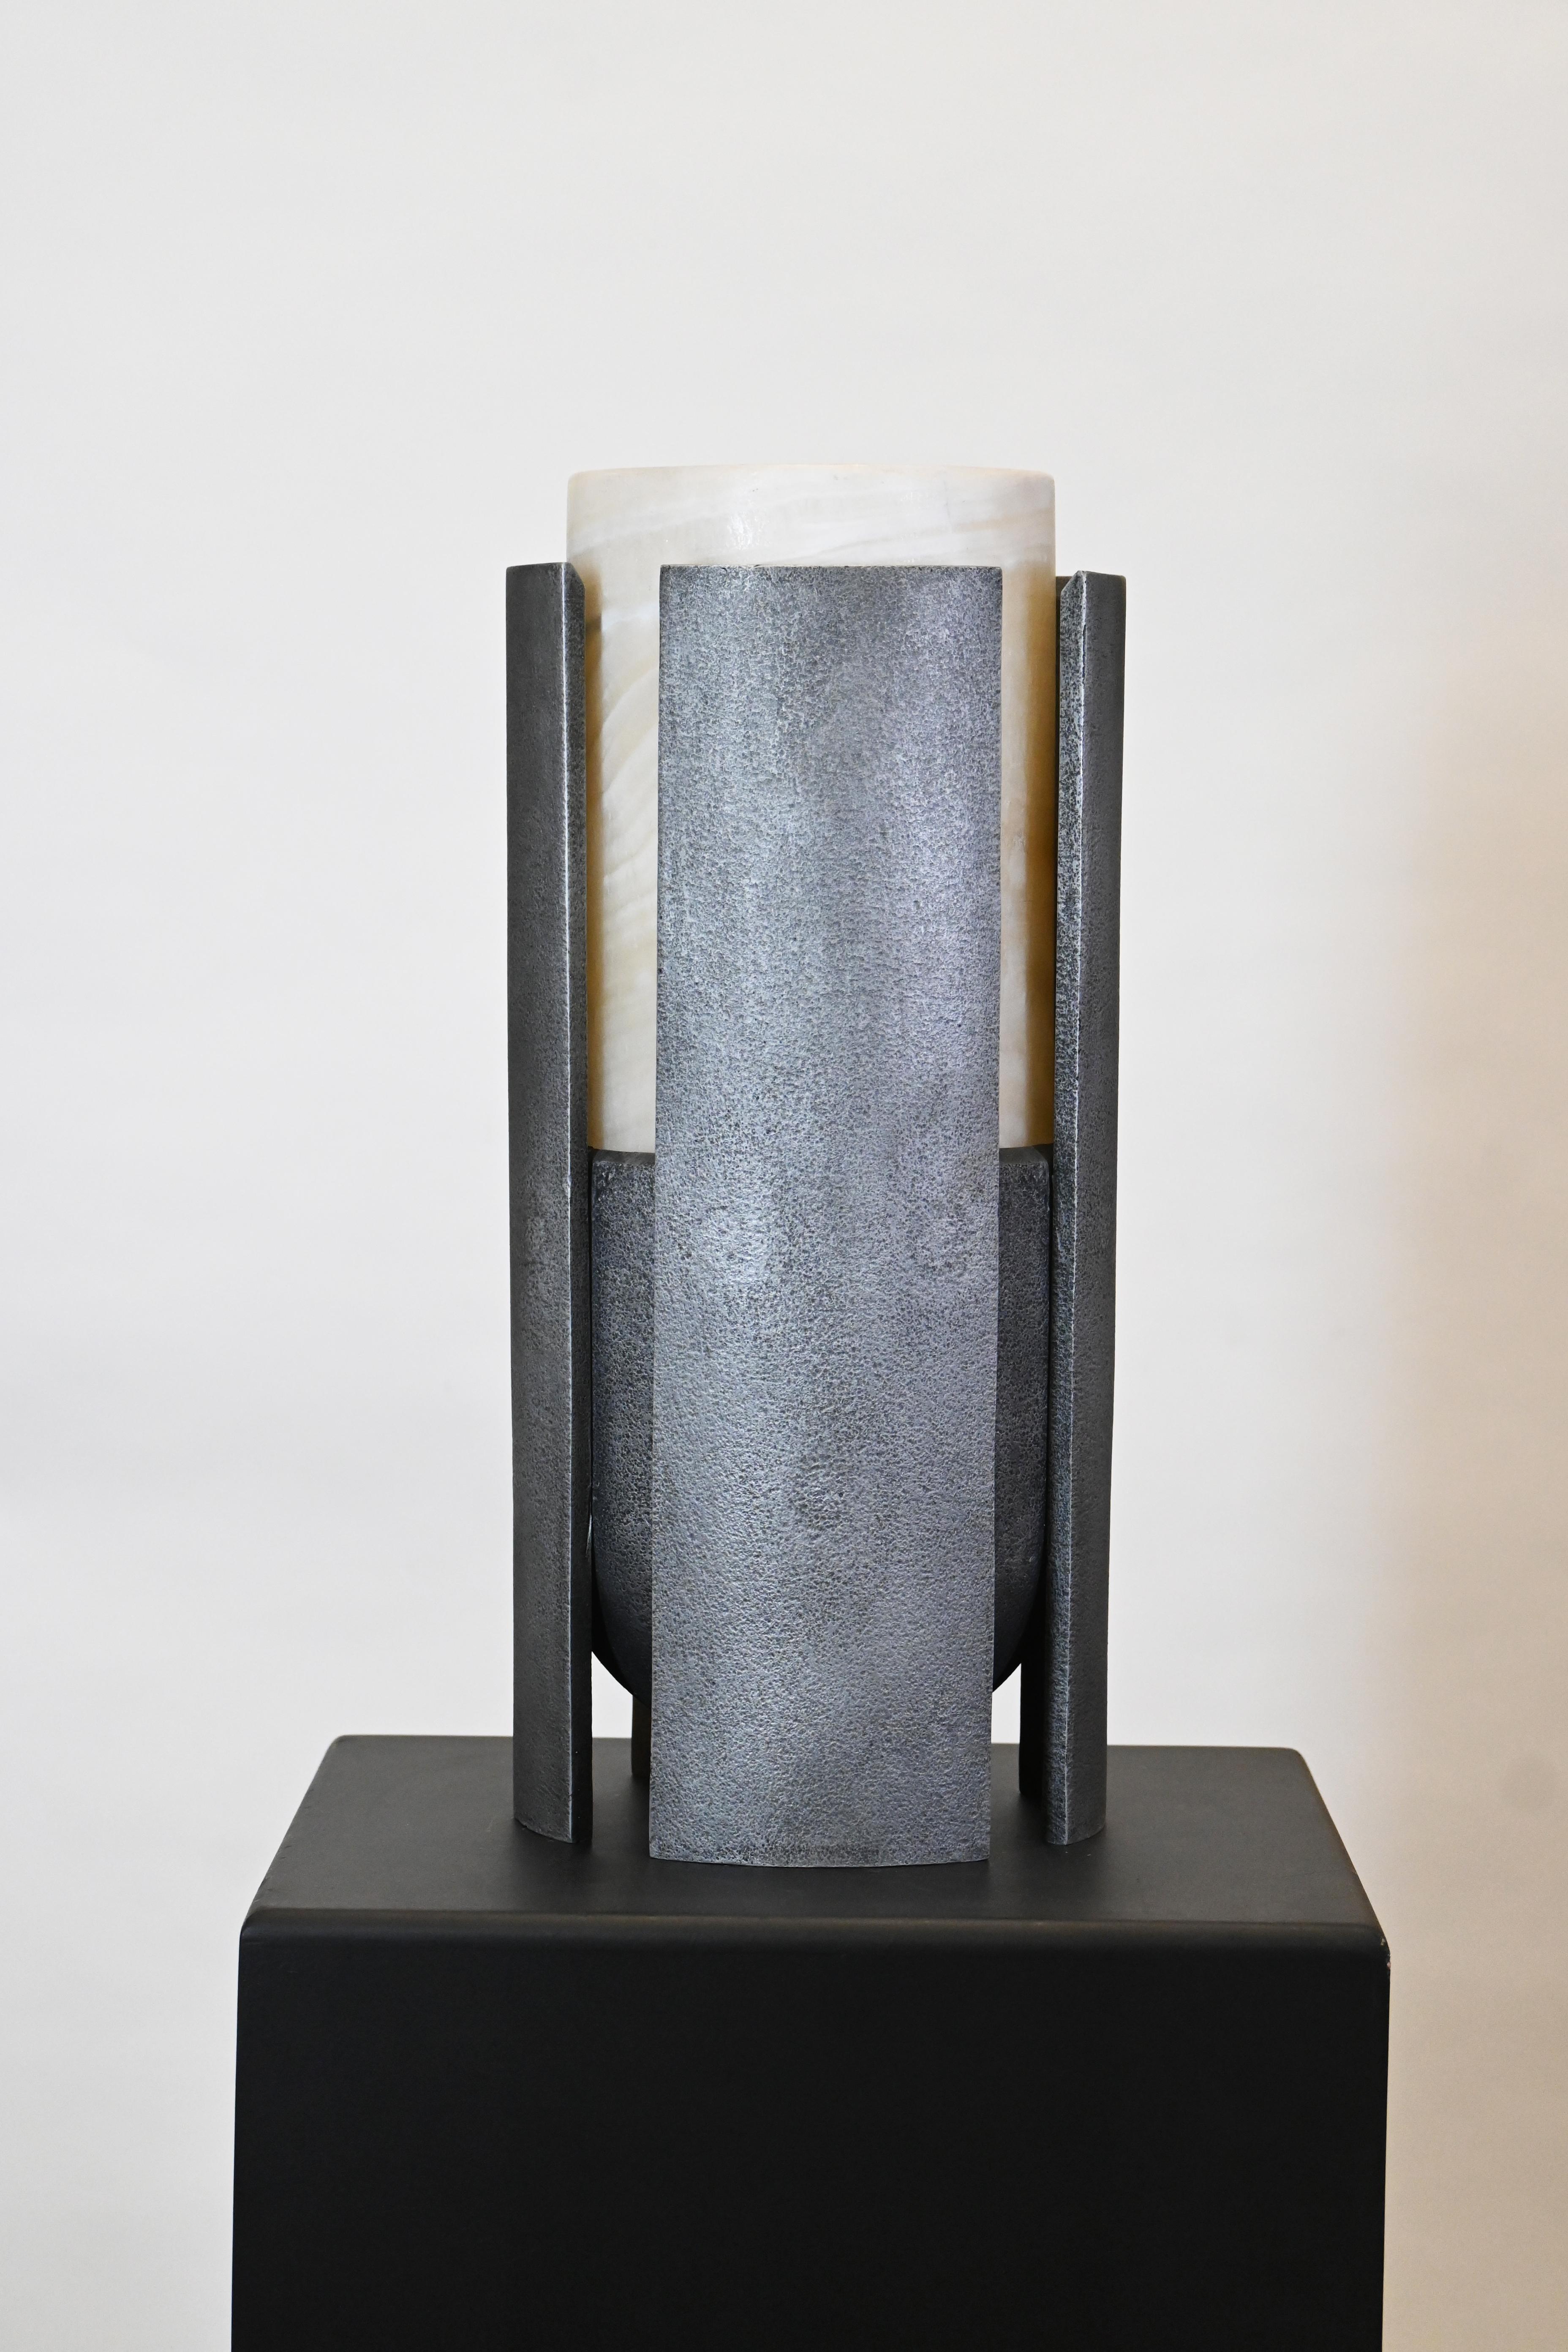 Runa Series-Graphite and Obsidian  Sculptural Vase 
By Deceres Studio
San Luis onyx and casted graphite aluminum
Obsidian and casted black aluminum
Edition of 7 
22D x 50H cm 
8.6D x 19.6H in

Runa is a sculptural vase inspired by ceremonial rituals